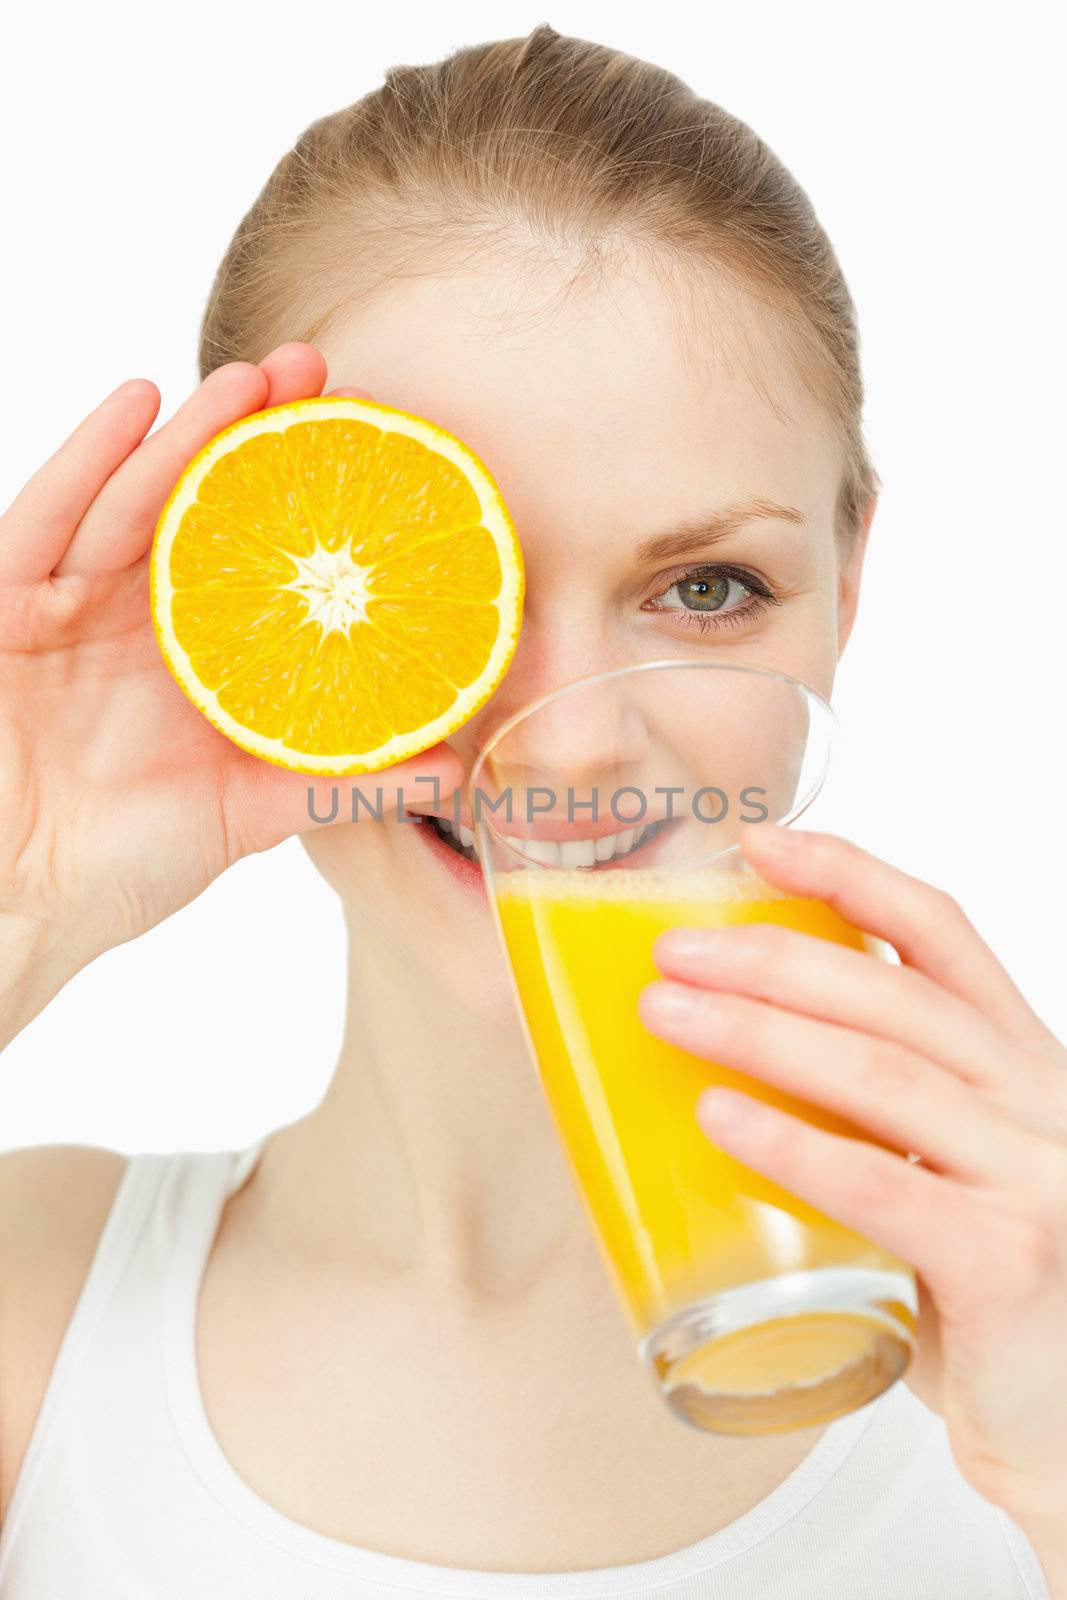 Woman placing an orange on her eye while drinking in a glass against white background